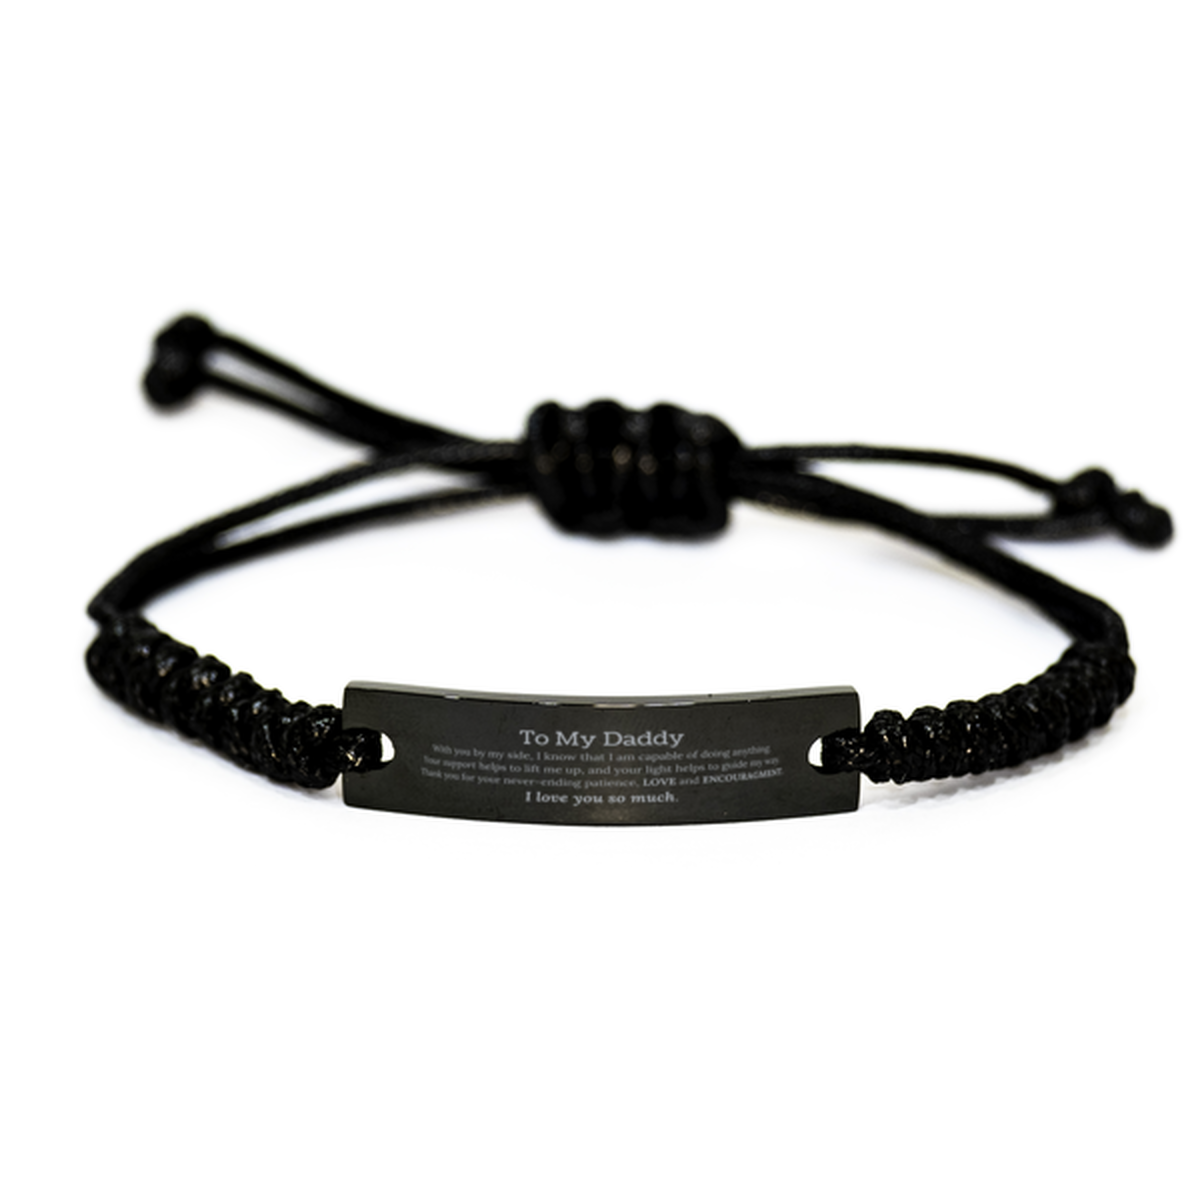 Appreciation Daddy Black Rope Bracelet Gifts, To My Daddy Birthday Christmas Wedding Keepsake Gifts for Daddy With you by my side, I know that I am capable of doing anything. I love you so much